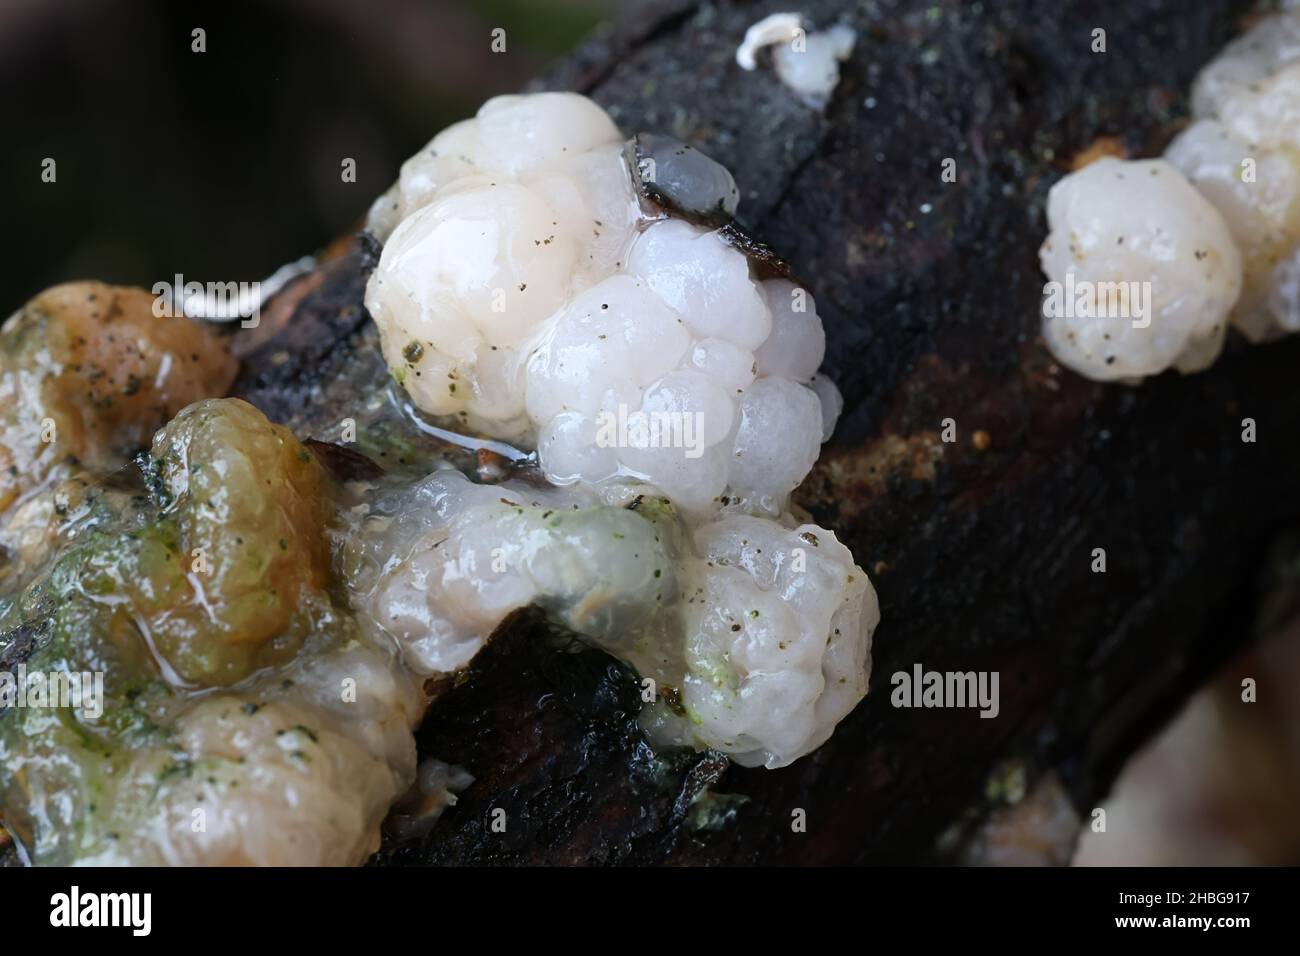 Tremella encephala, commonly known as Conifer brain, wild jelly fungus from Finland Stock Photo